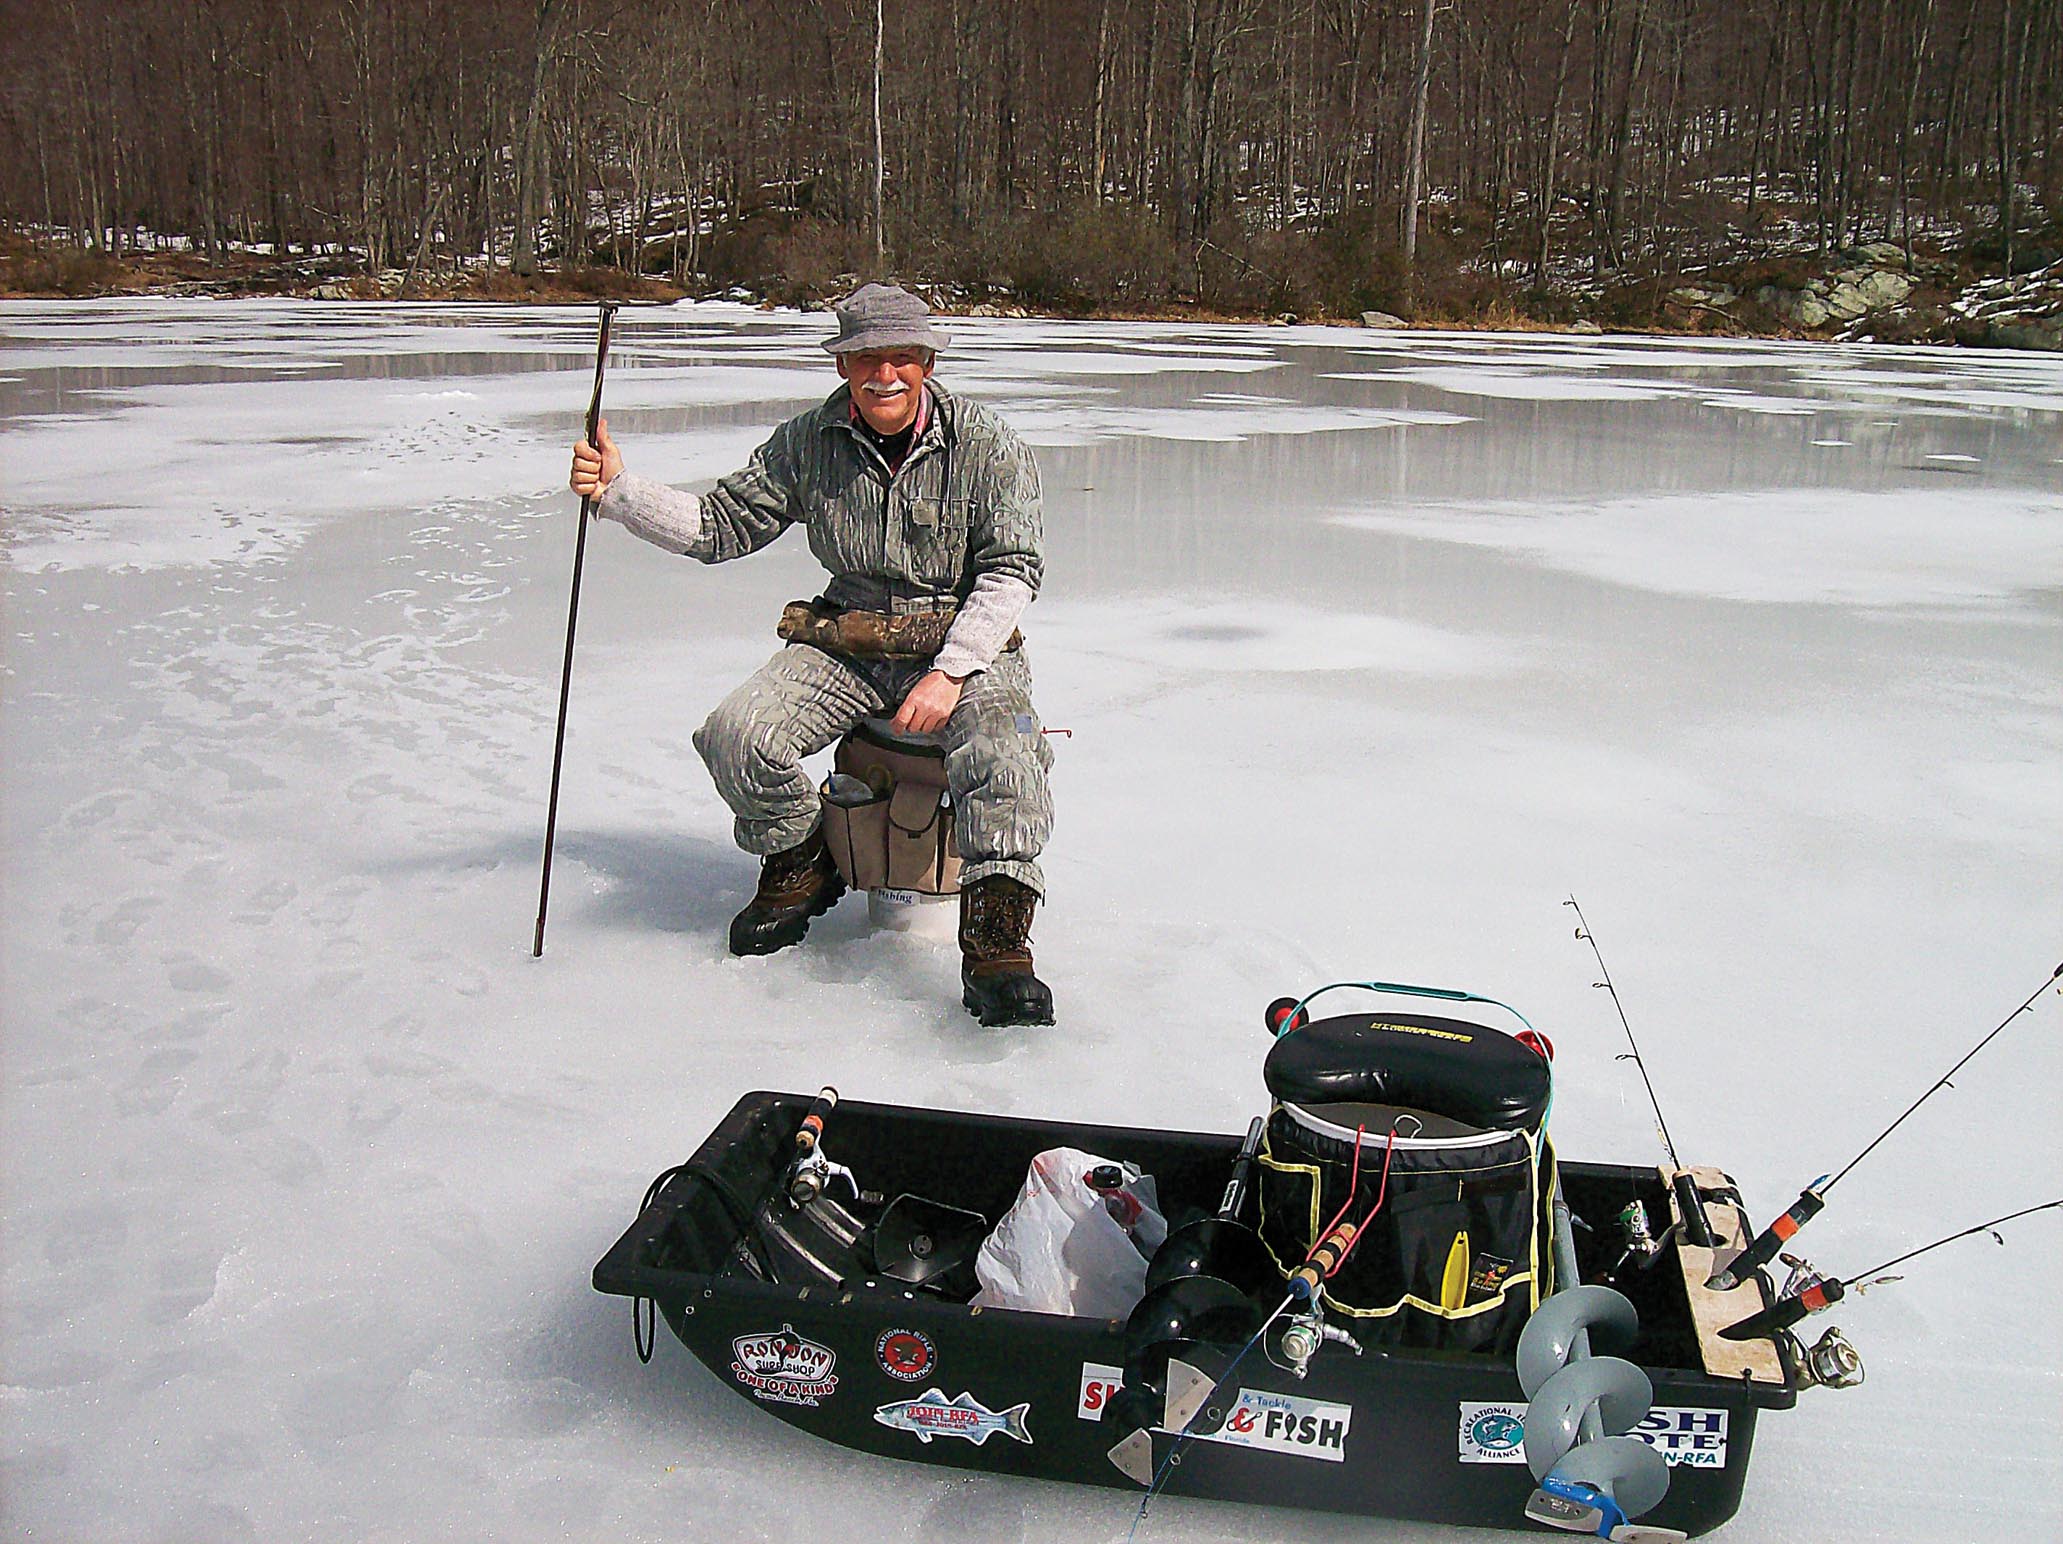 Step onto the ice and catch tonight's dinner - Backwoods Home Magazine